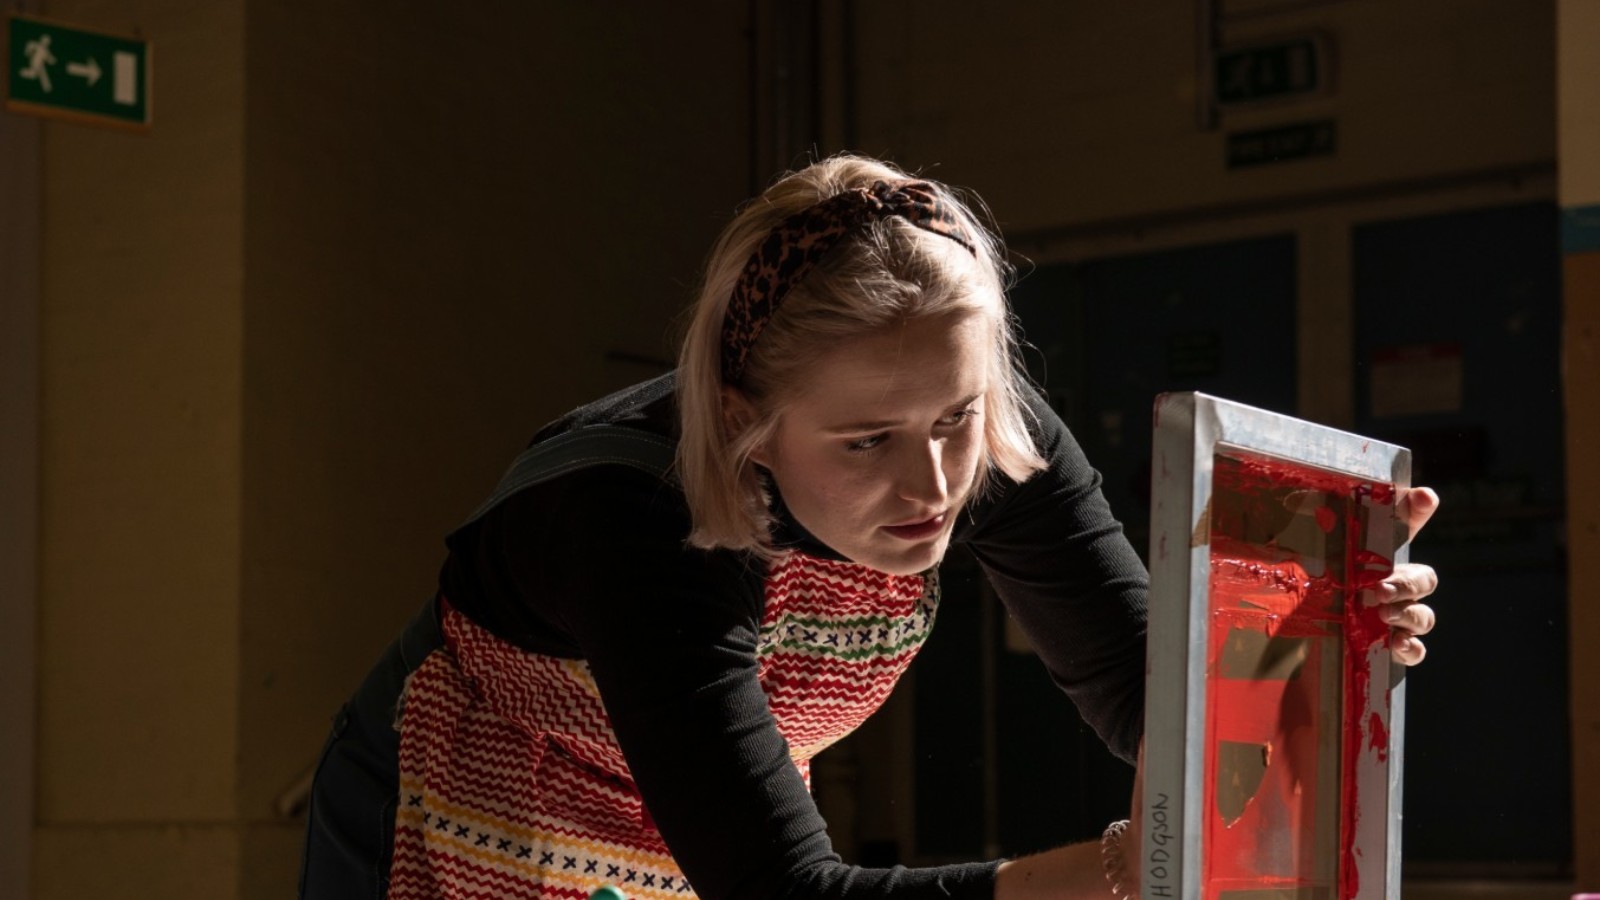 A person with blonde hair in a bob haircut, wearing a headband, a black long sleeved top and a multi-coloured apron leans down to look at a screen printing frame. This is a wooden frame with canvas painted red in the centre.